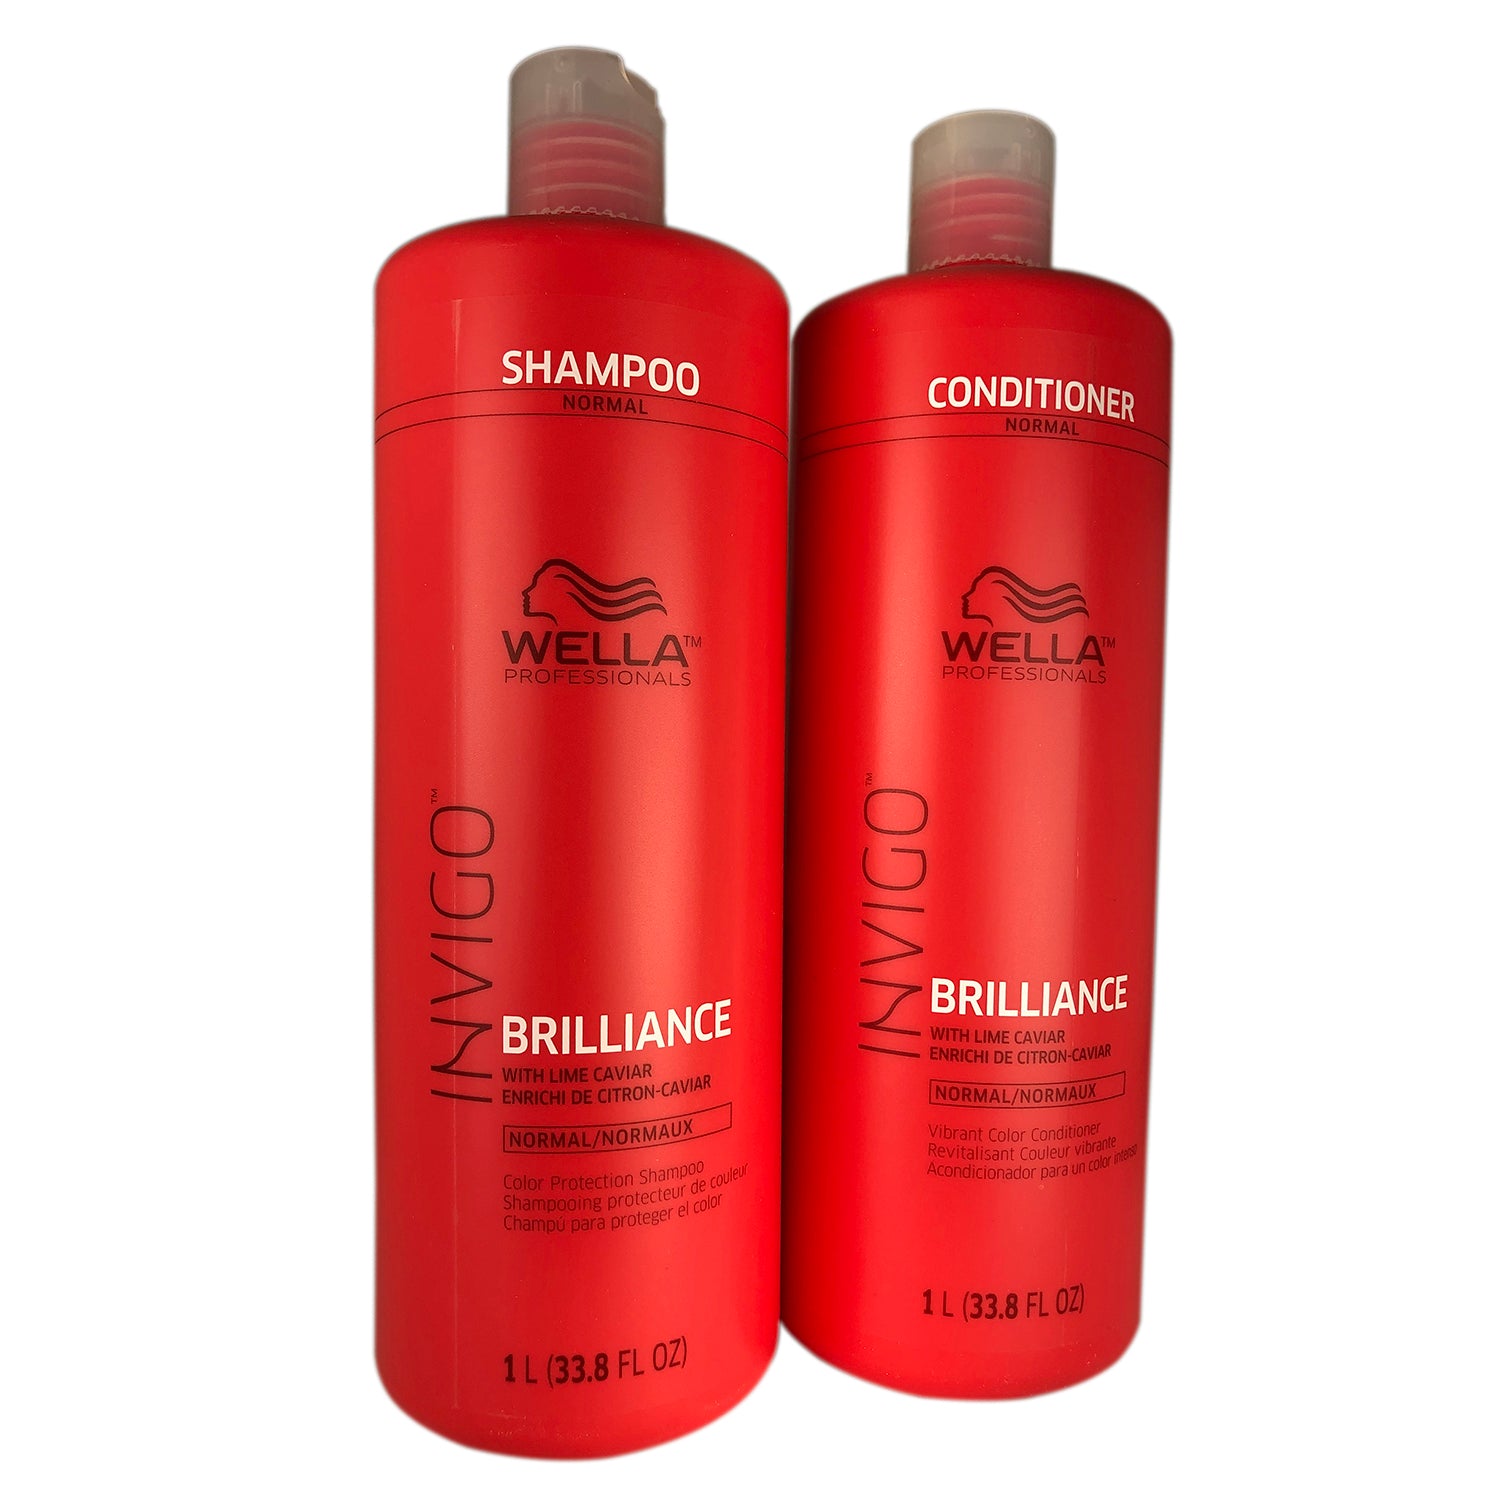 Wella Brilliance Shampoo and Conditioner Duo 33.8 oz Each Fine to Normal Hair